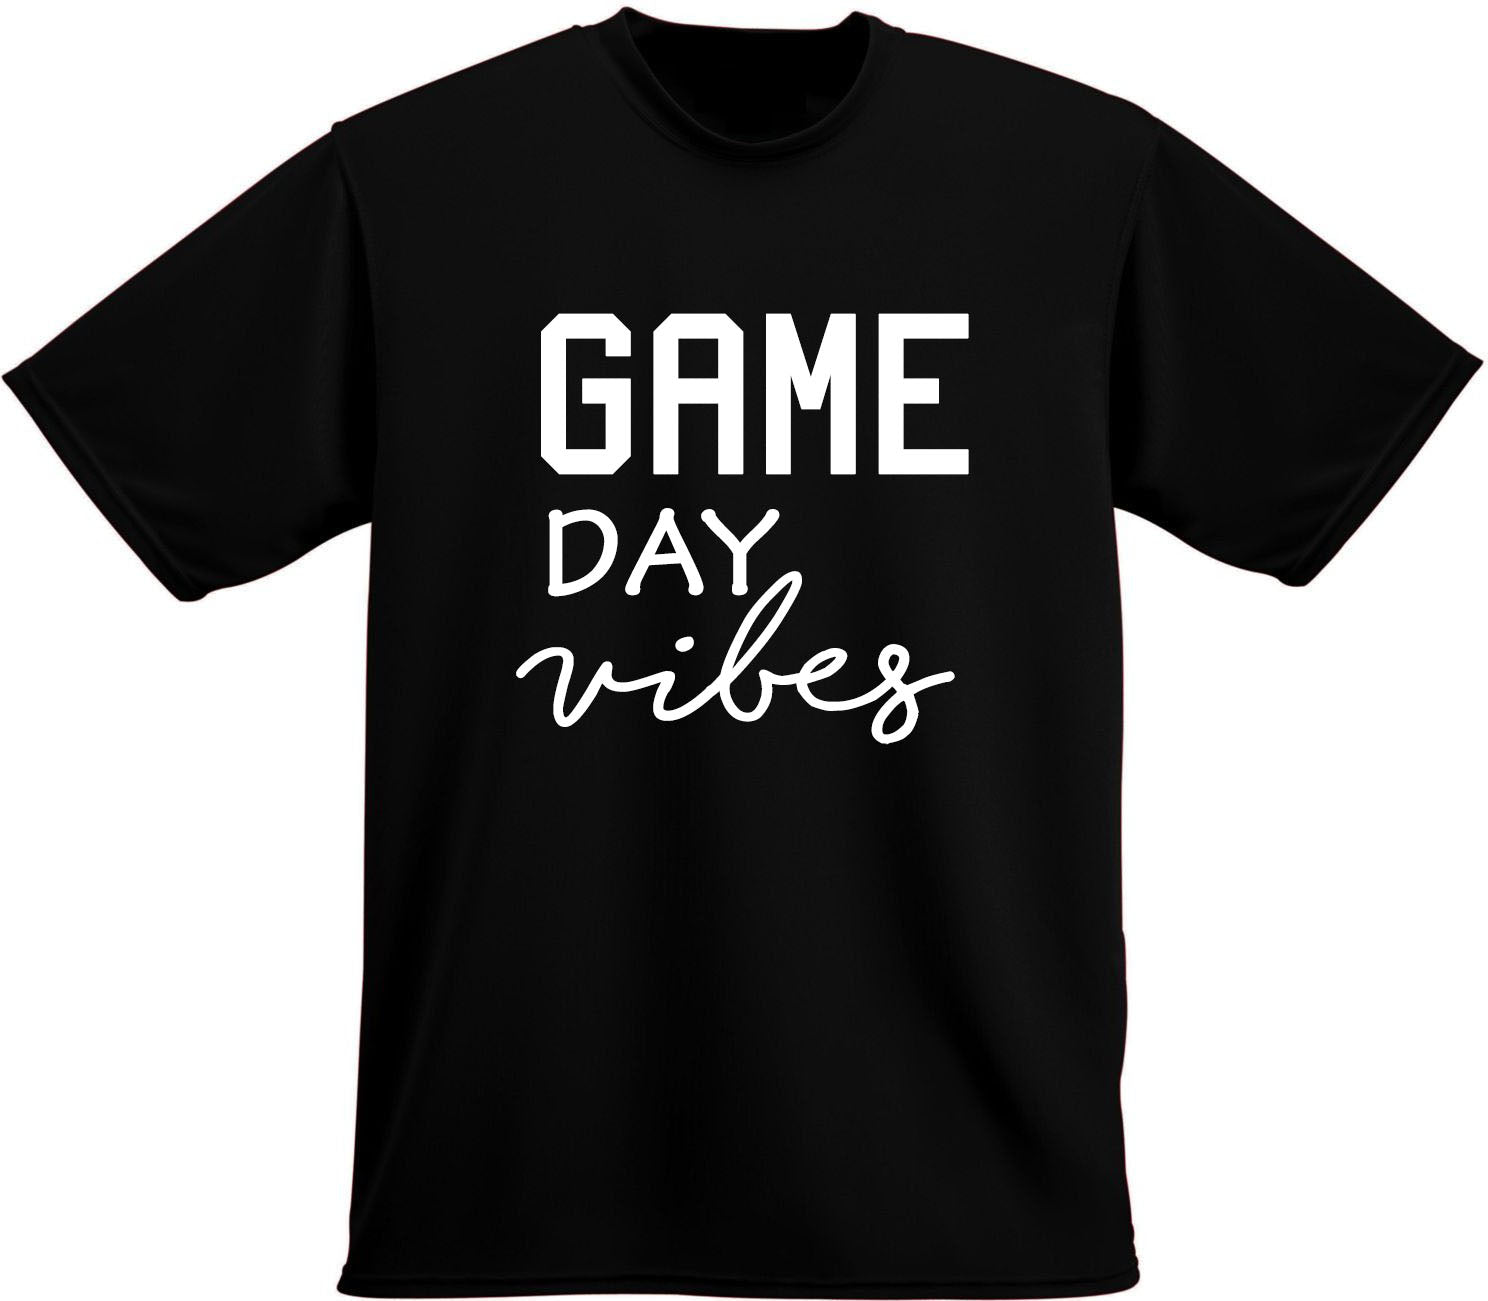 Game day vibes t-shirt